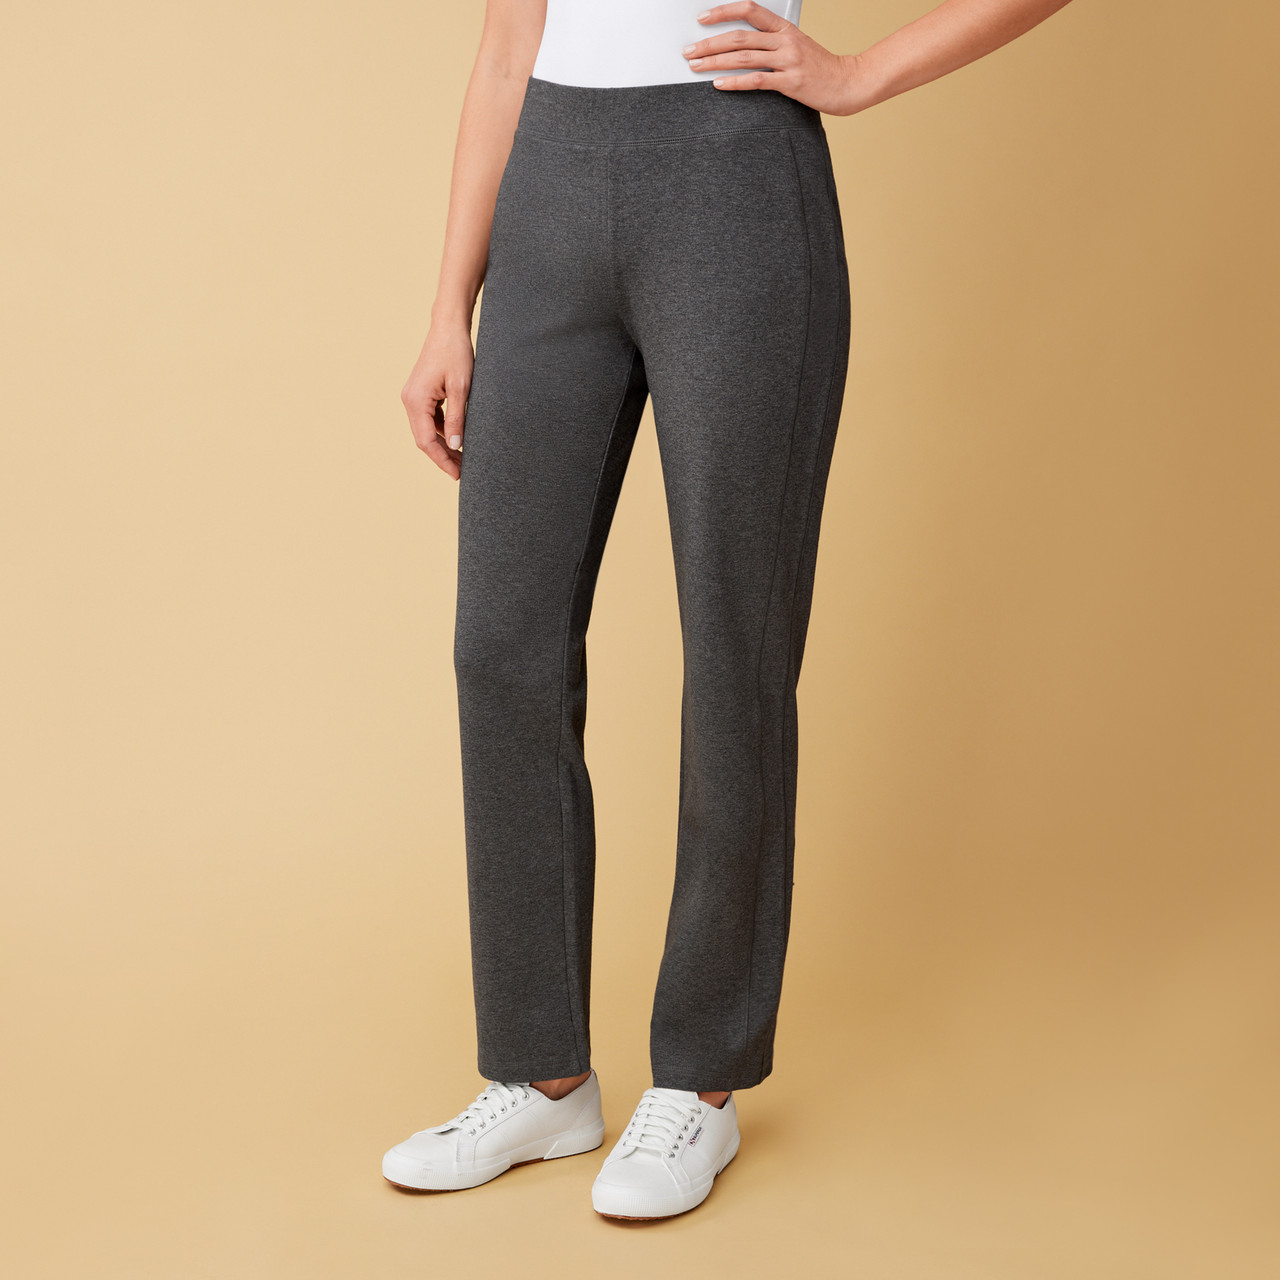 Basic Editions Spandex Casual Pants